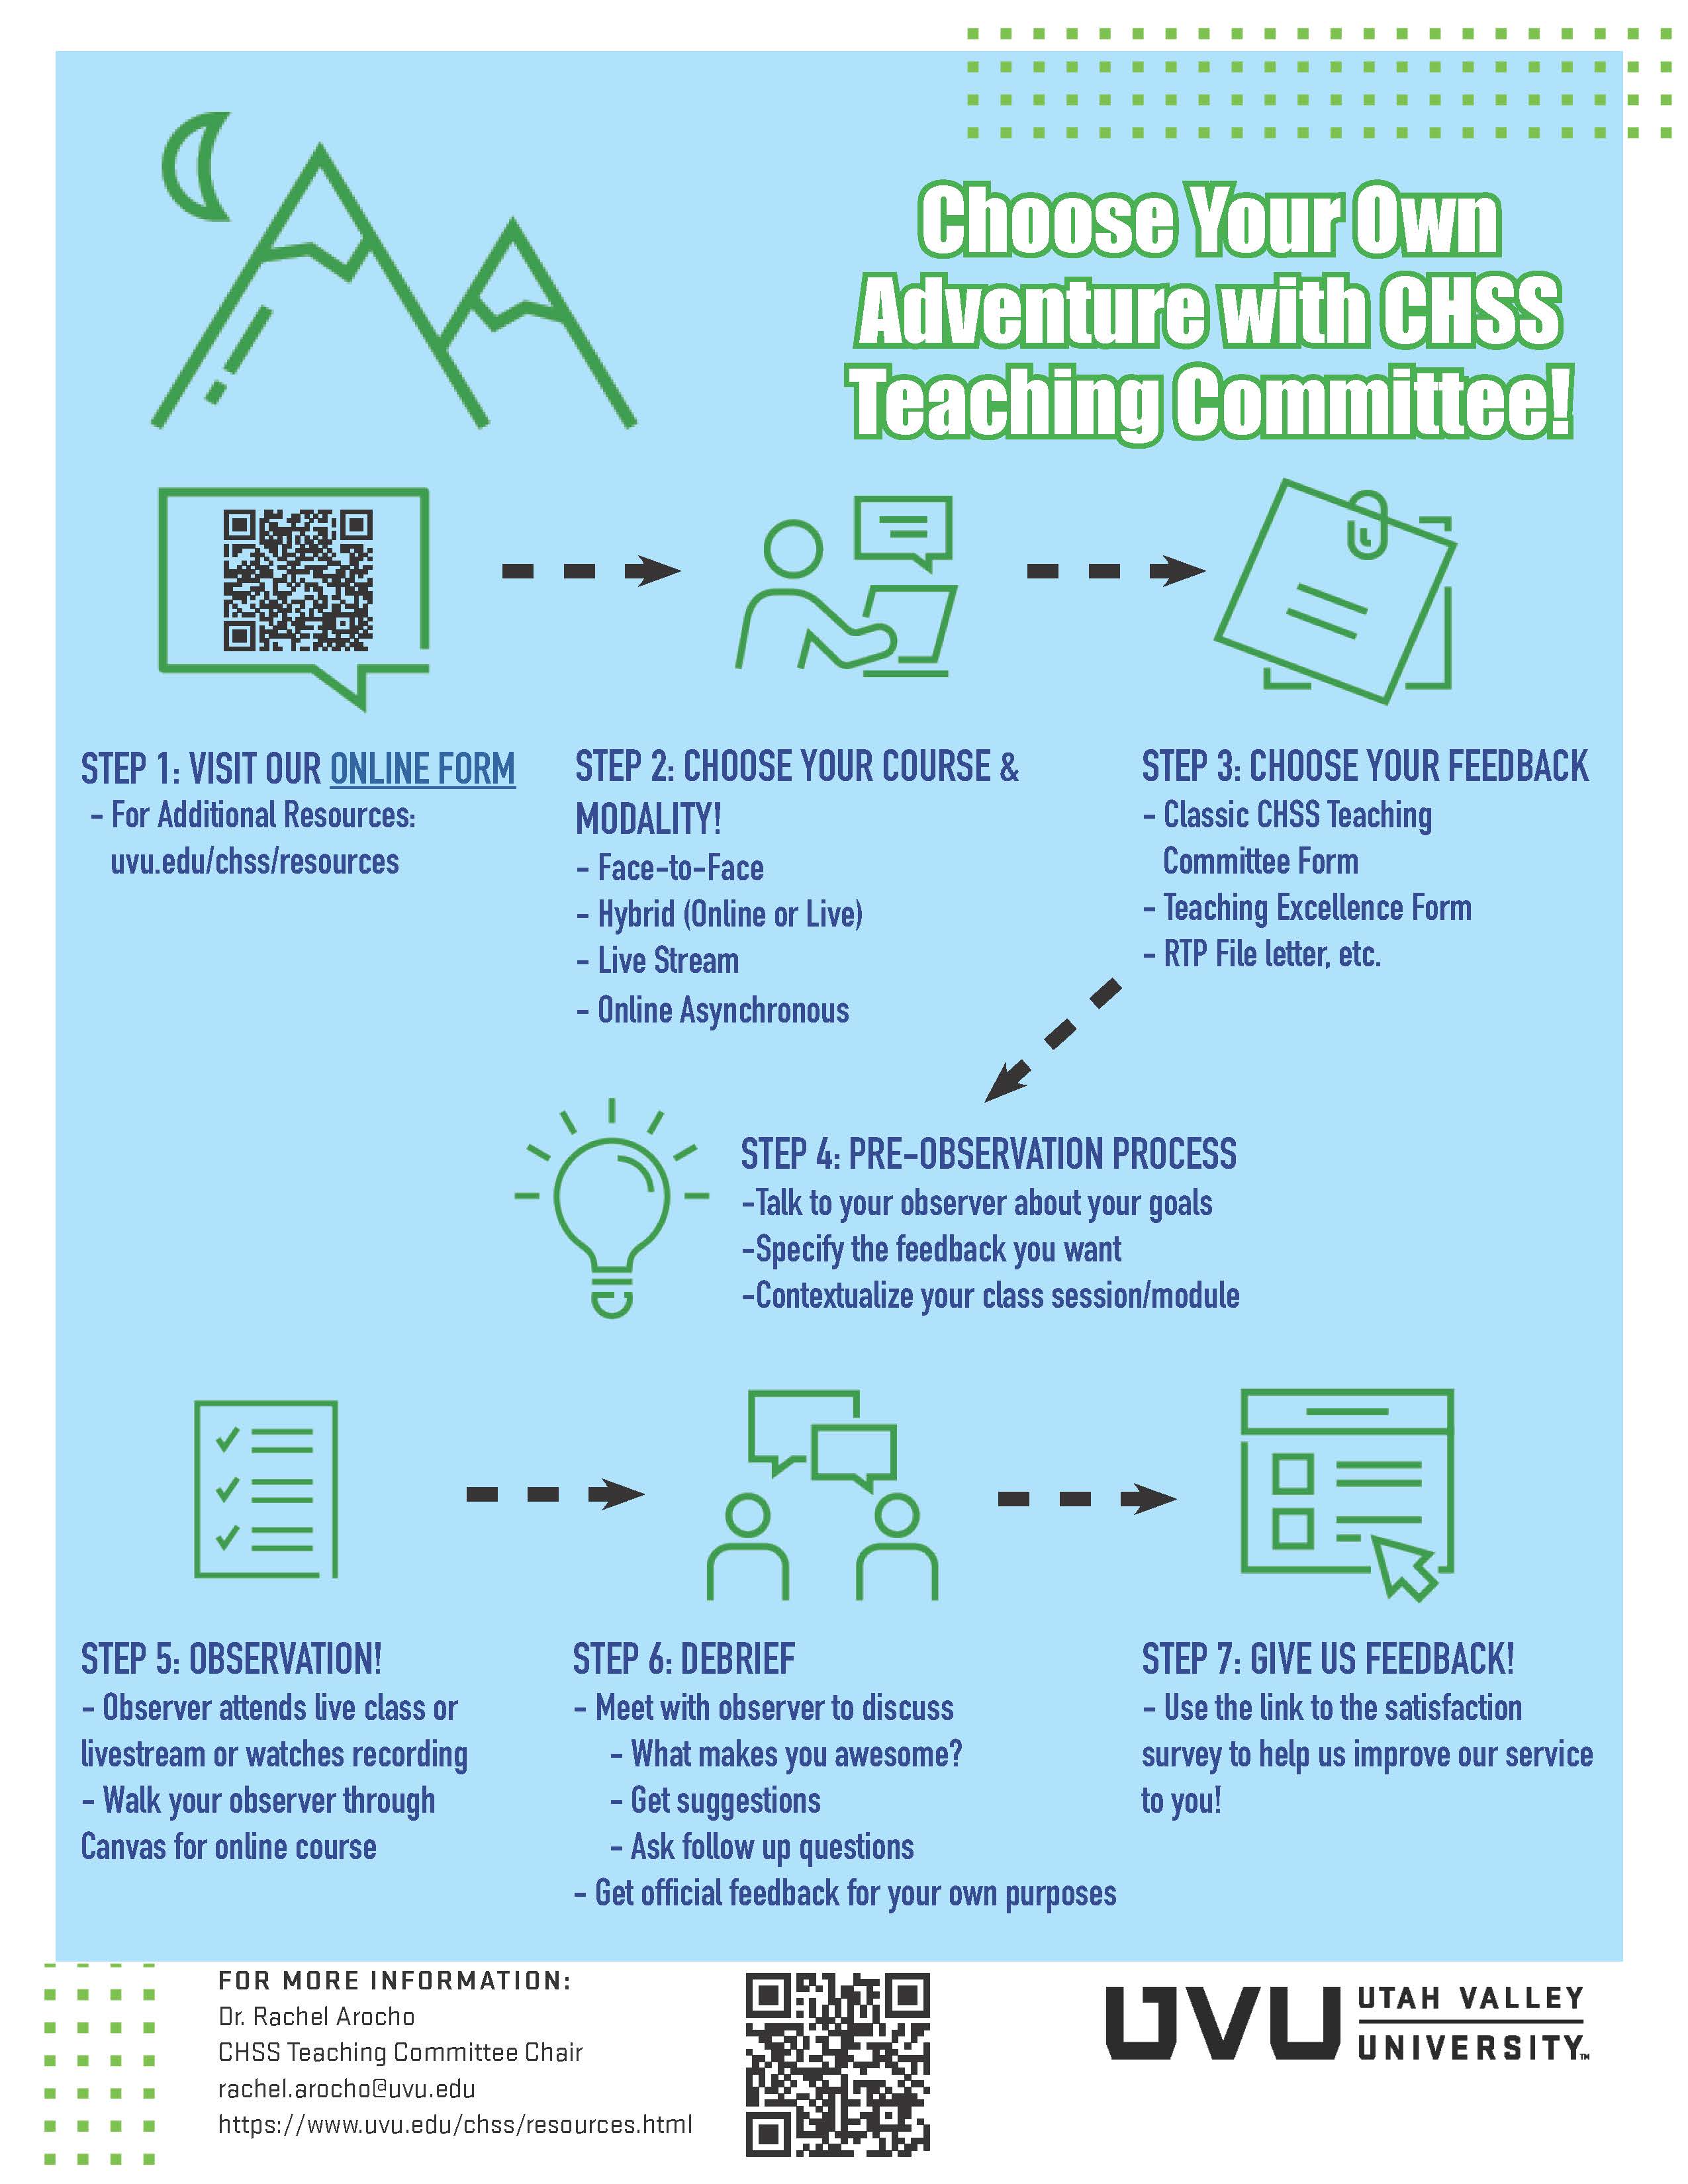 Choose your own adventure with the CHSS Teaching Committee! Visit our online form at uvu.edu/chss/resources, choose your modality, choose your feedback, complete a pre-observation meeting, observation, and debrief, then give us feedback! 